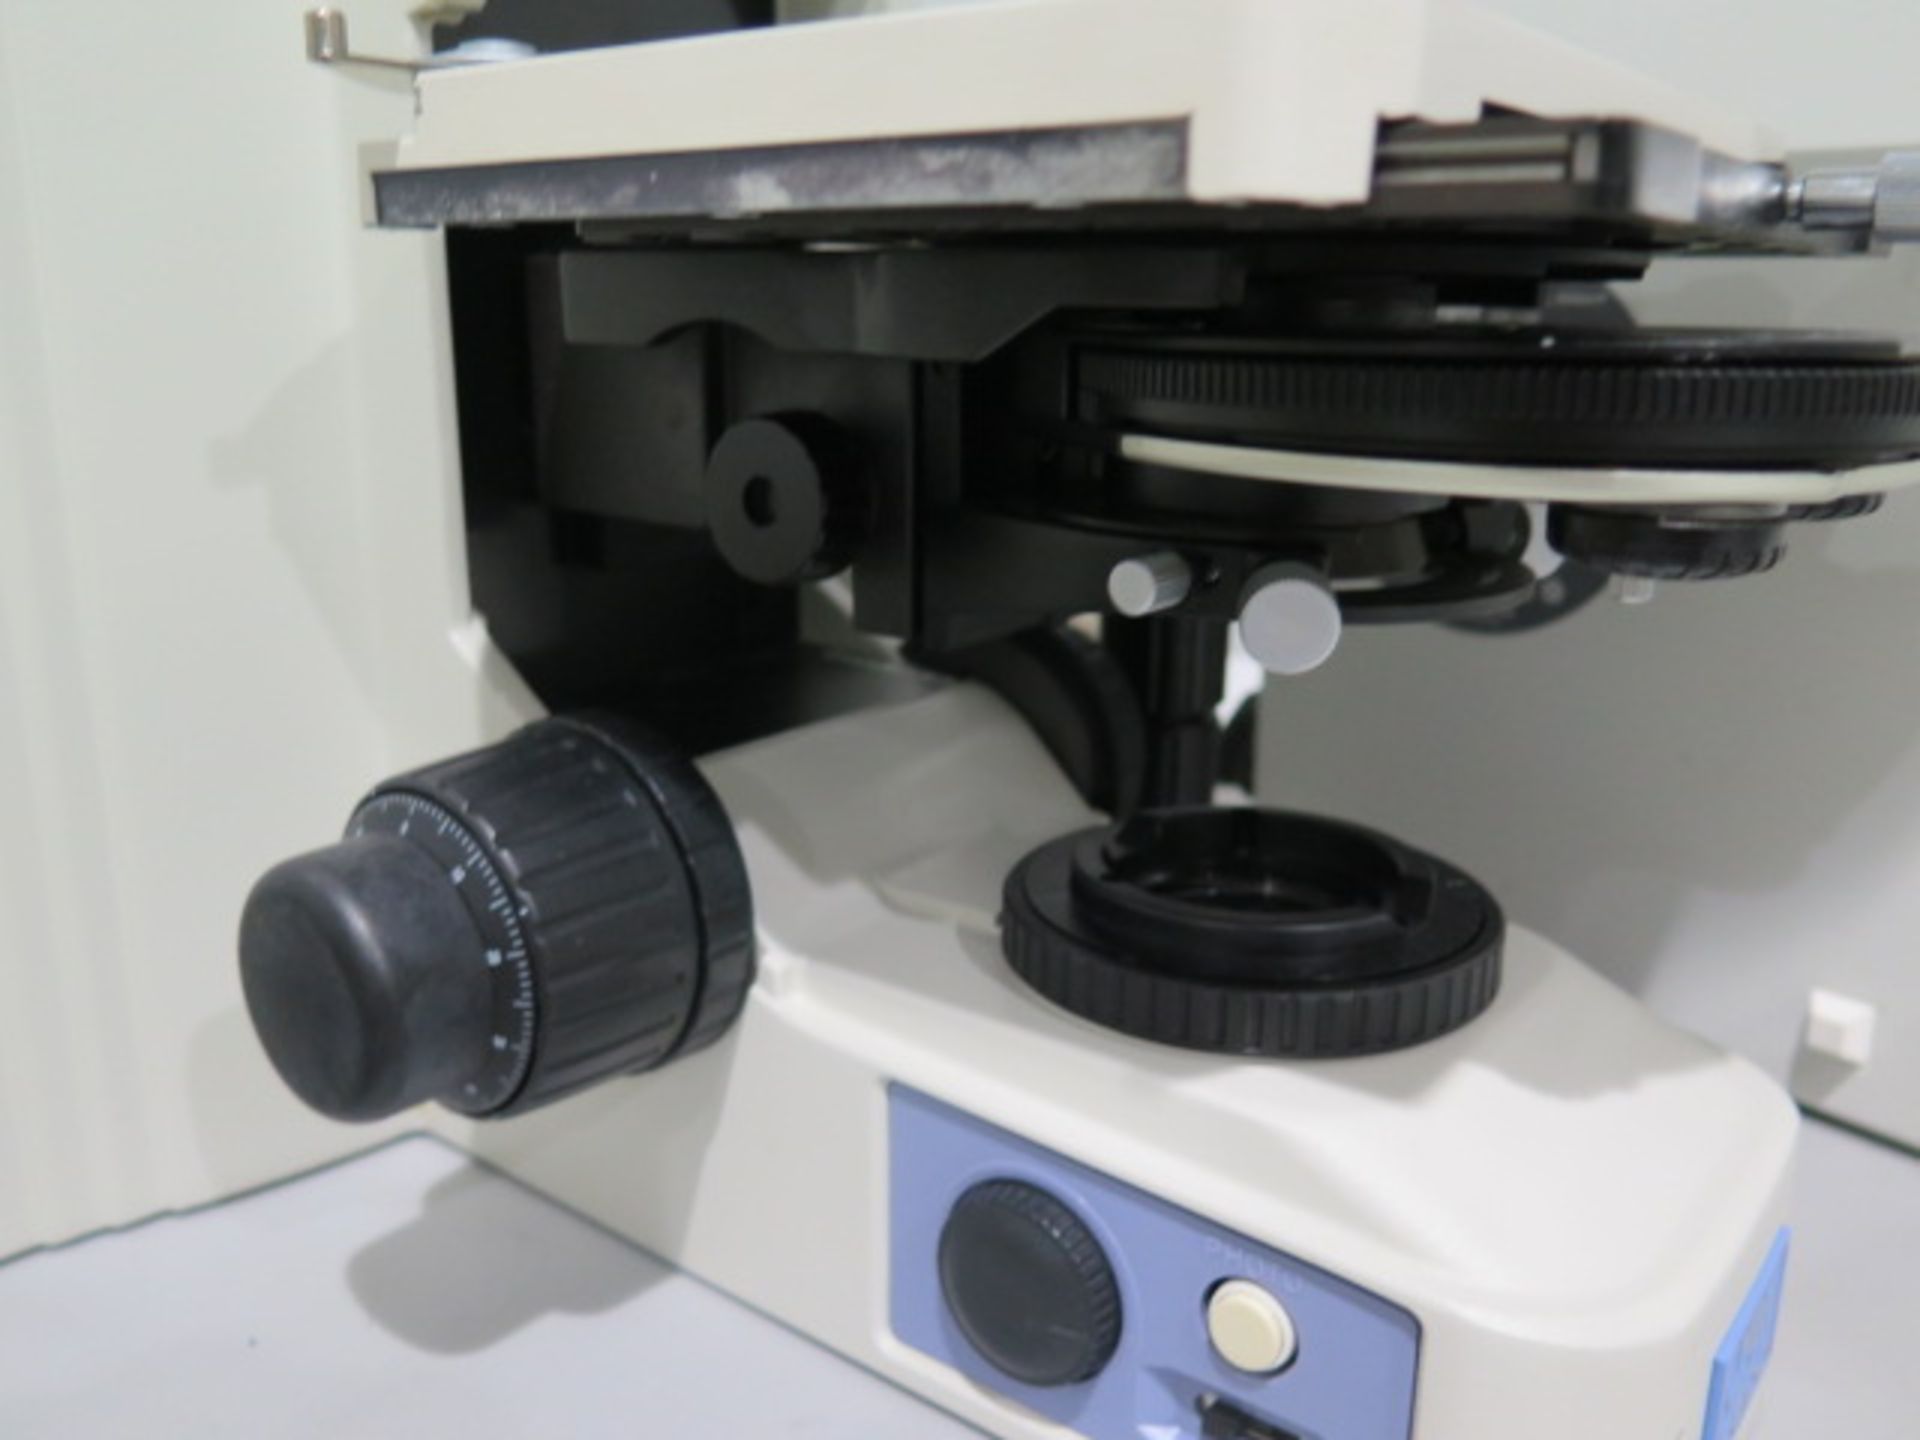 Nikon Eclipse E600 Research Microscope s/n 763673 w/ Nikon Light,DS-U2 Digital Sight Unit,SOLD AS IS - Image 10 of 15